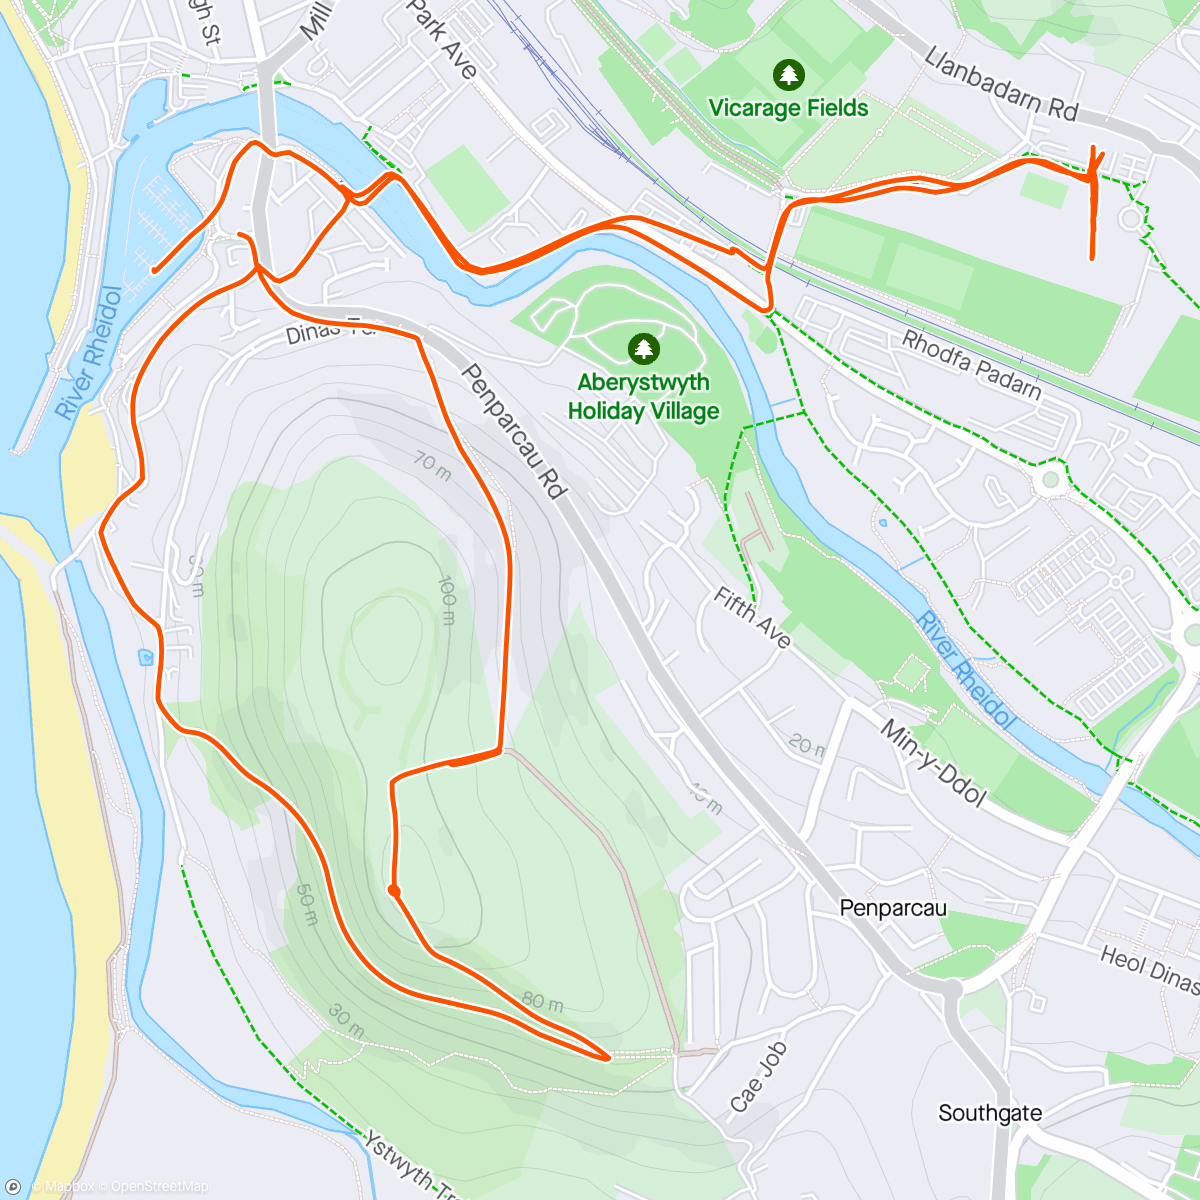 Mapa de la actividad (Club session including warm up (run up pen Dinas!)
Then short hill efforts by the horse field.
Pleased with the progression.)